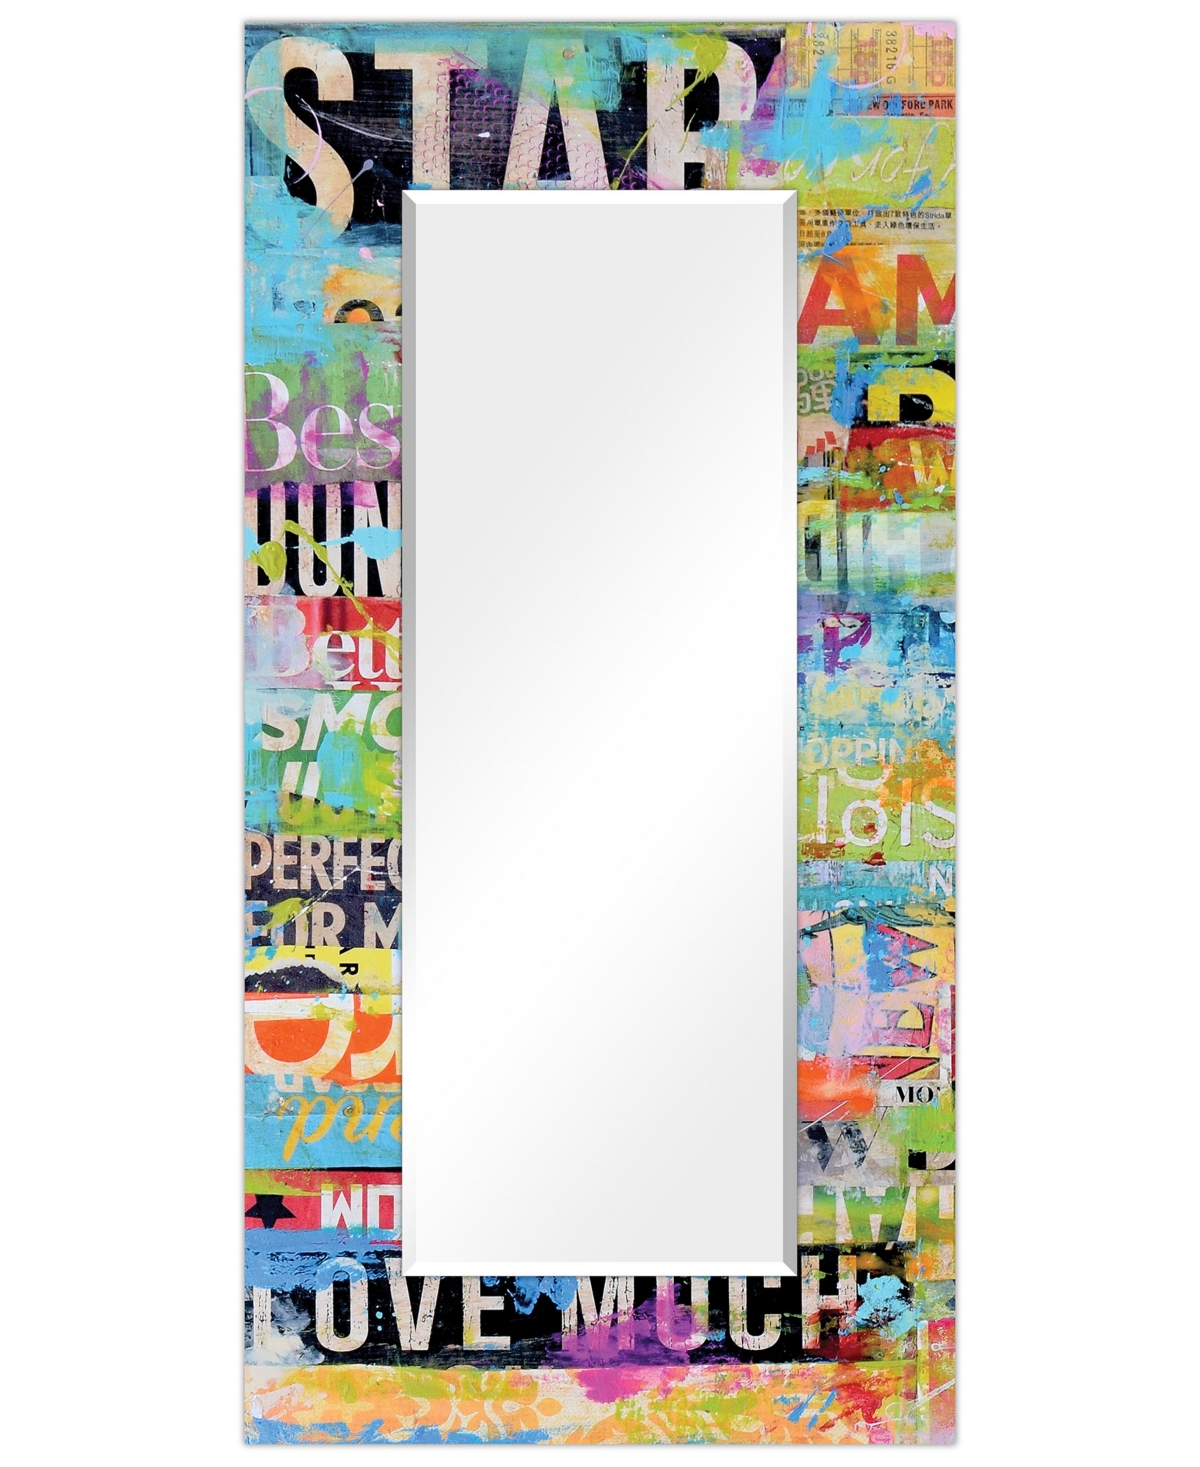 Empire Art Direct "metro Mix" Rectangular Beveled Mirror On Free Floating Printed Tempered Art Glass, 72" X 36" X 0.4" In Multi-color